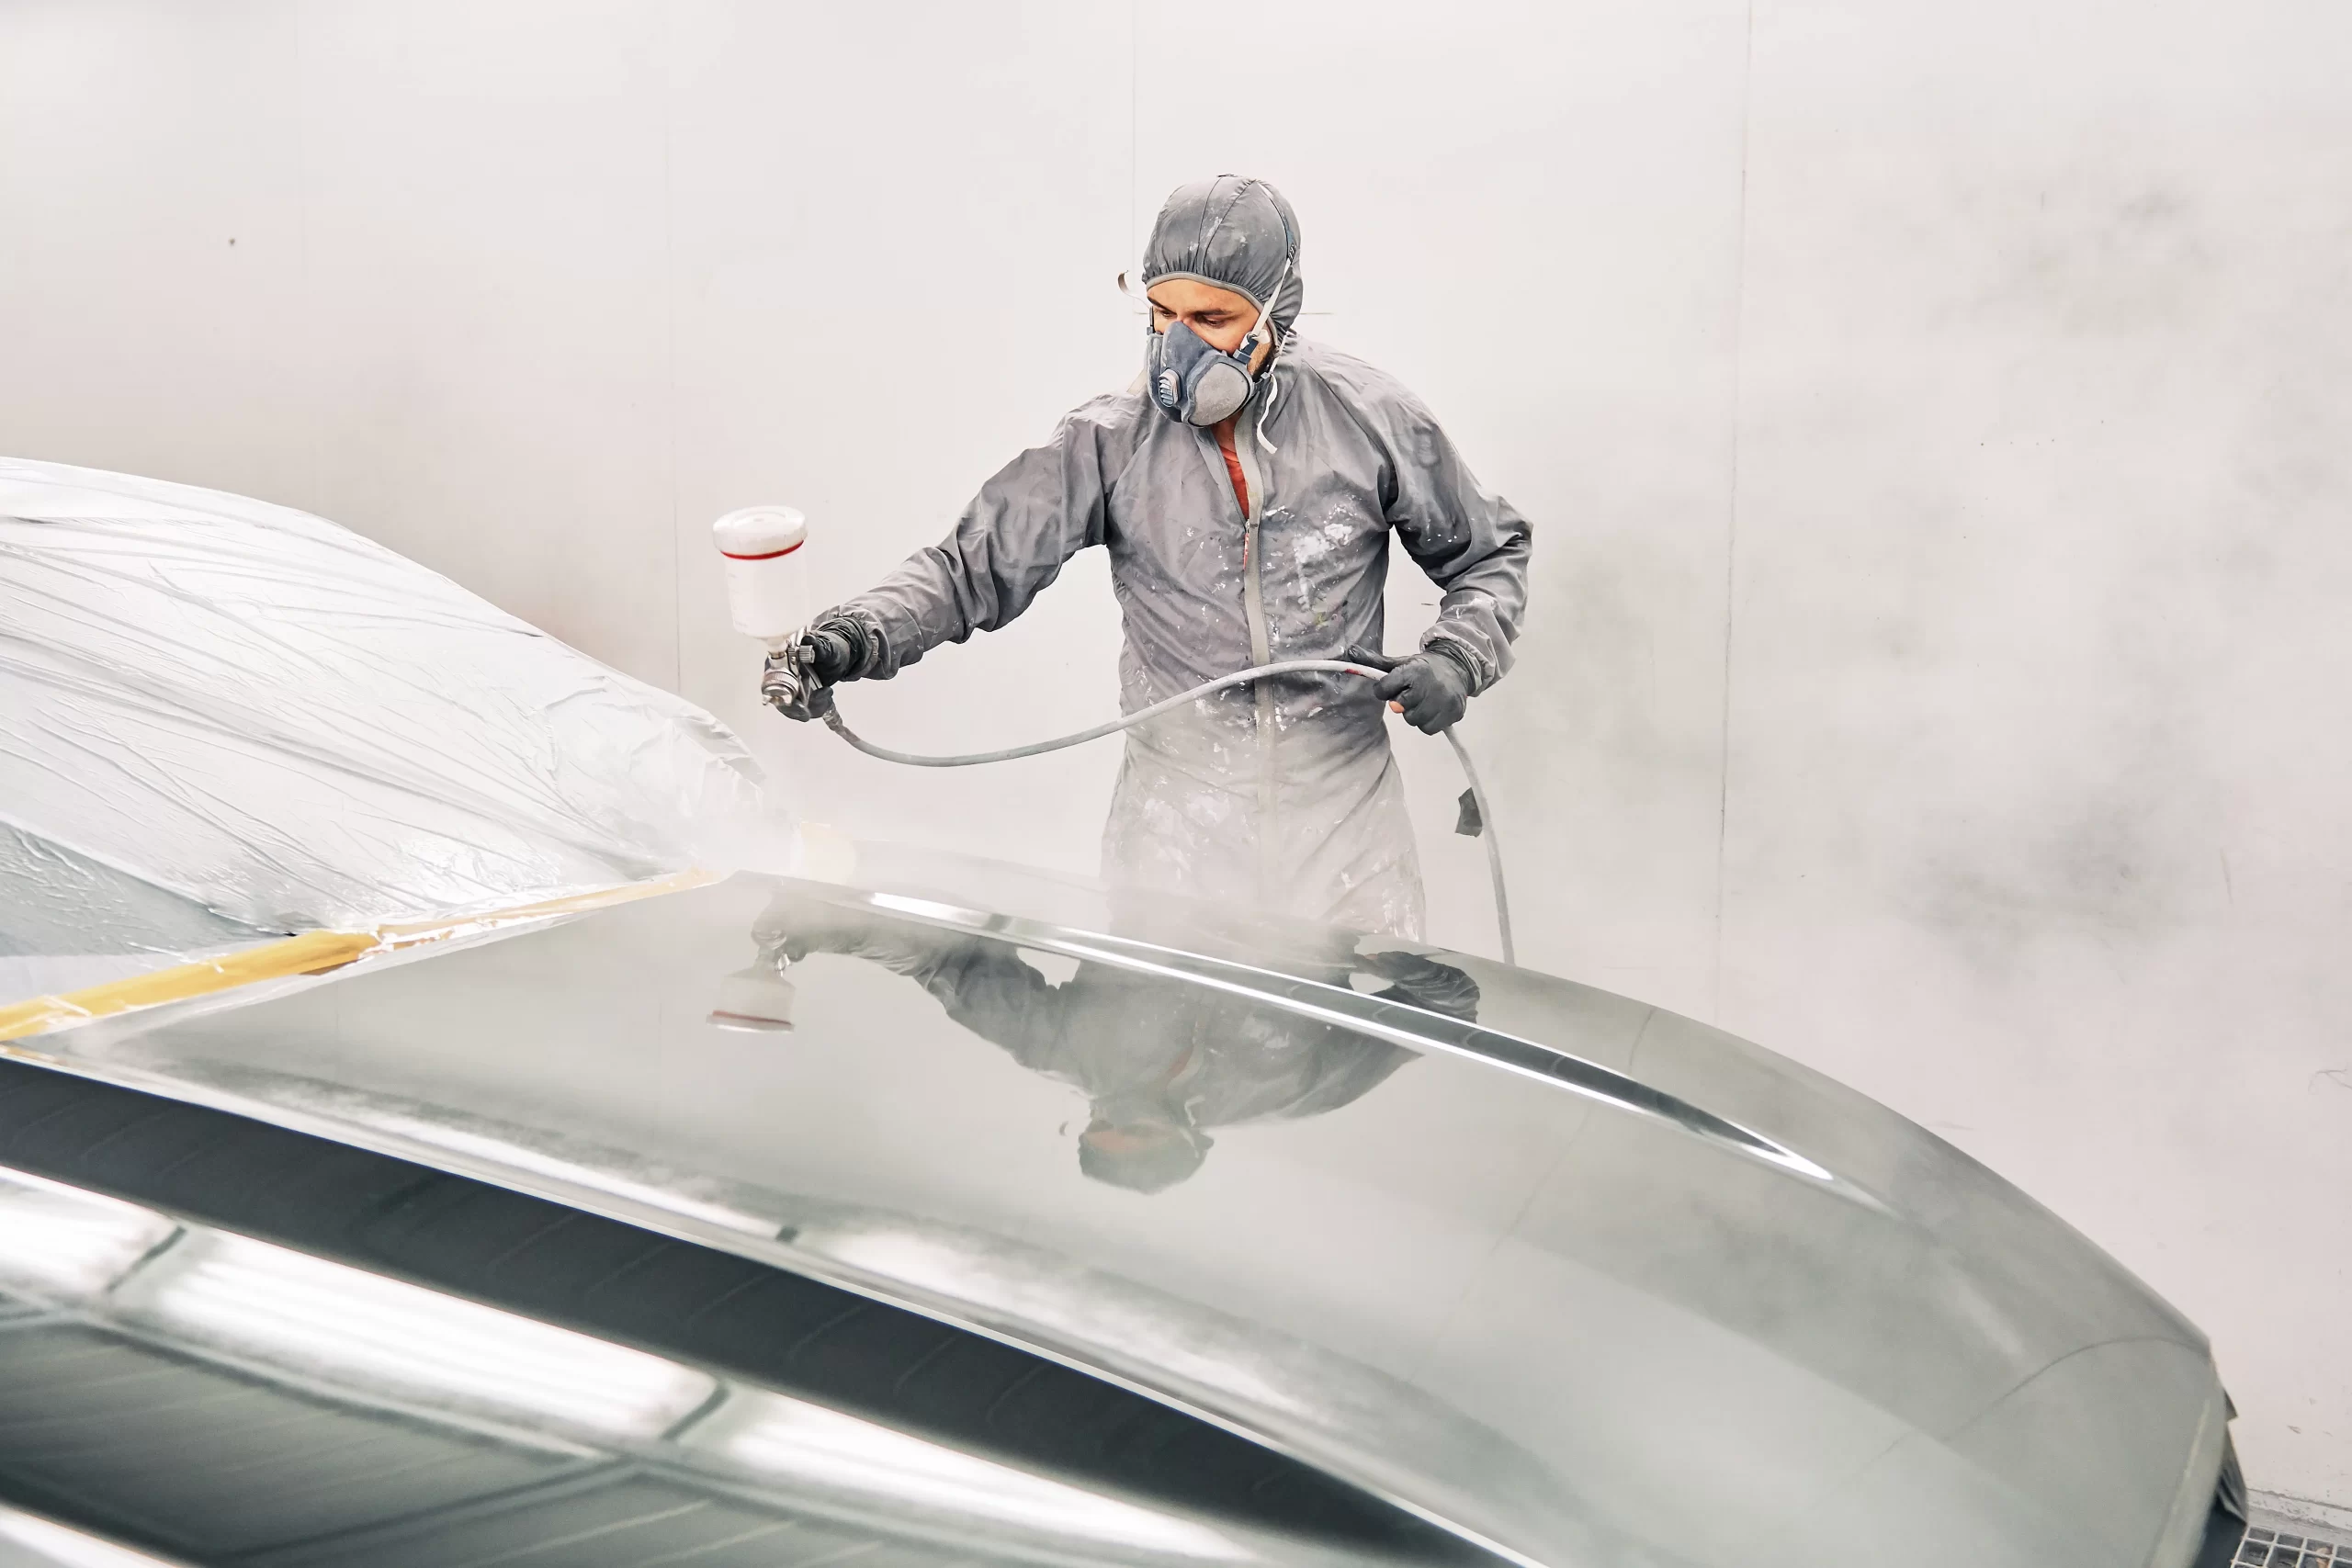 Get the Best Full Car Paint Services with our Experts’ Care